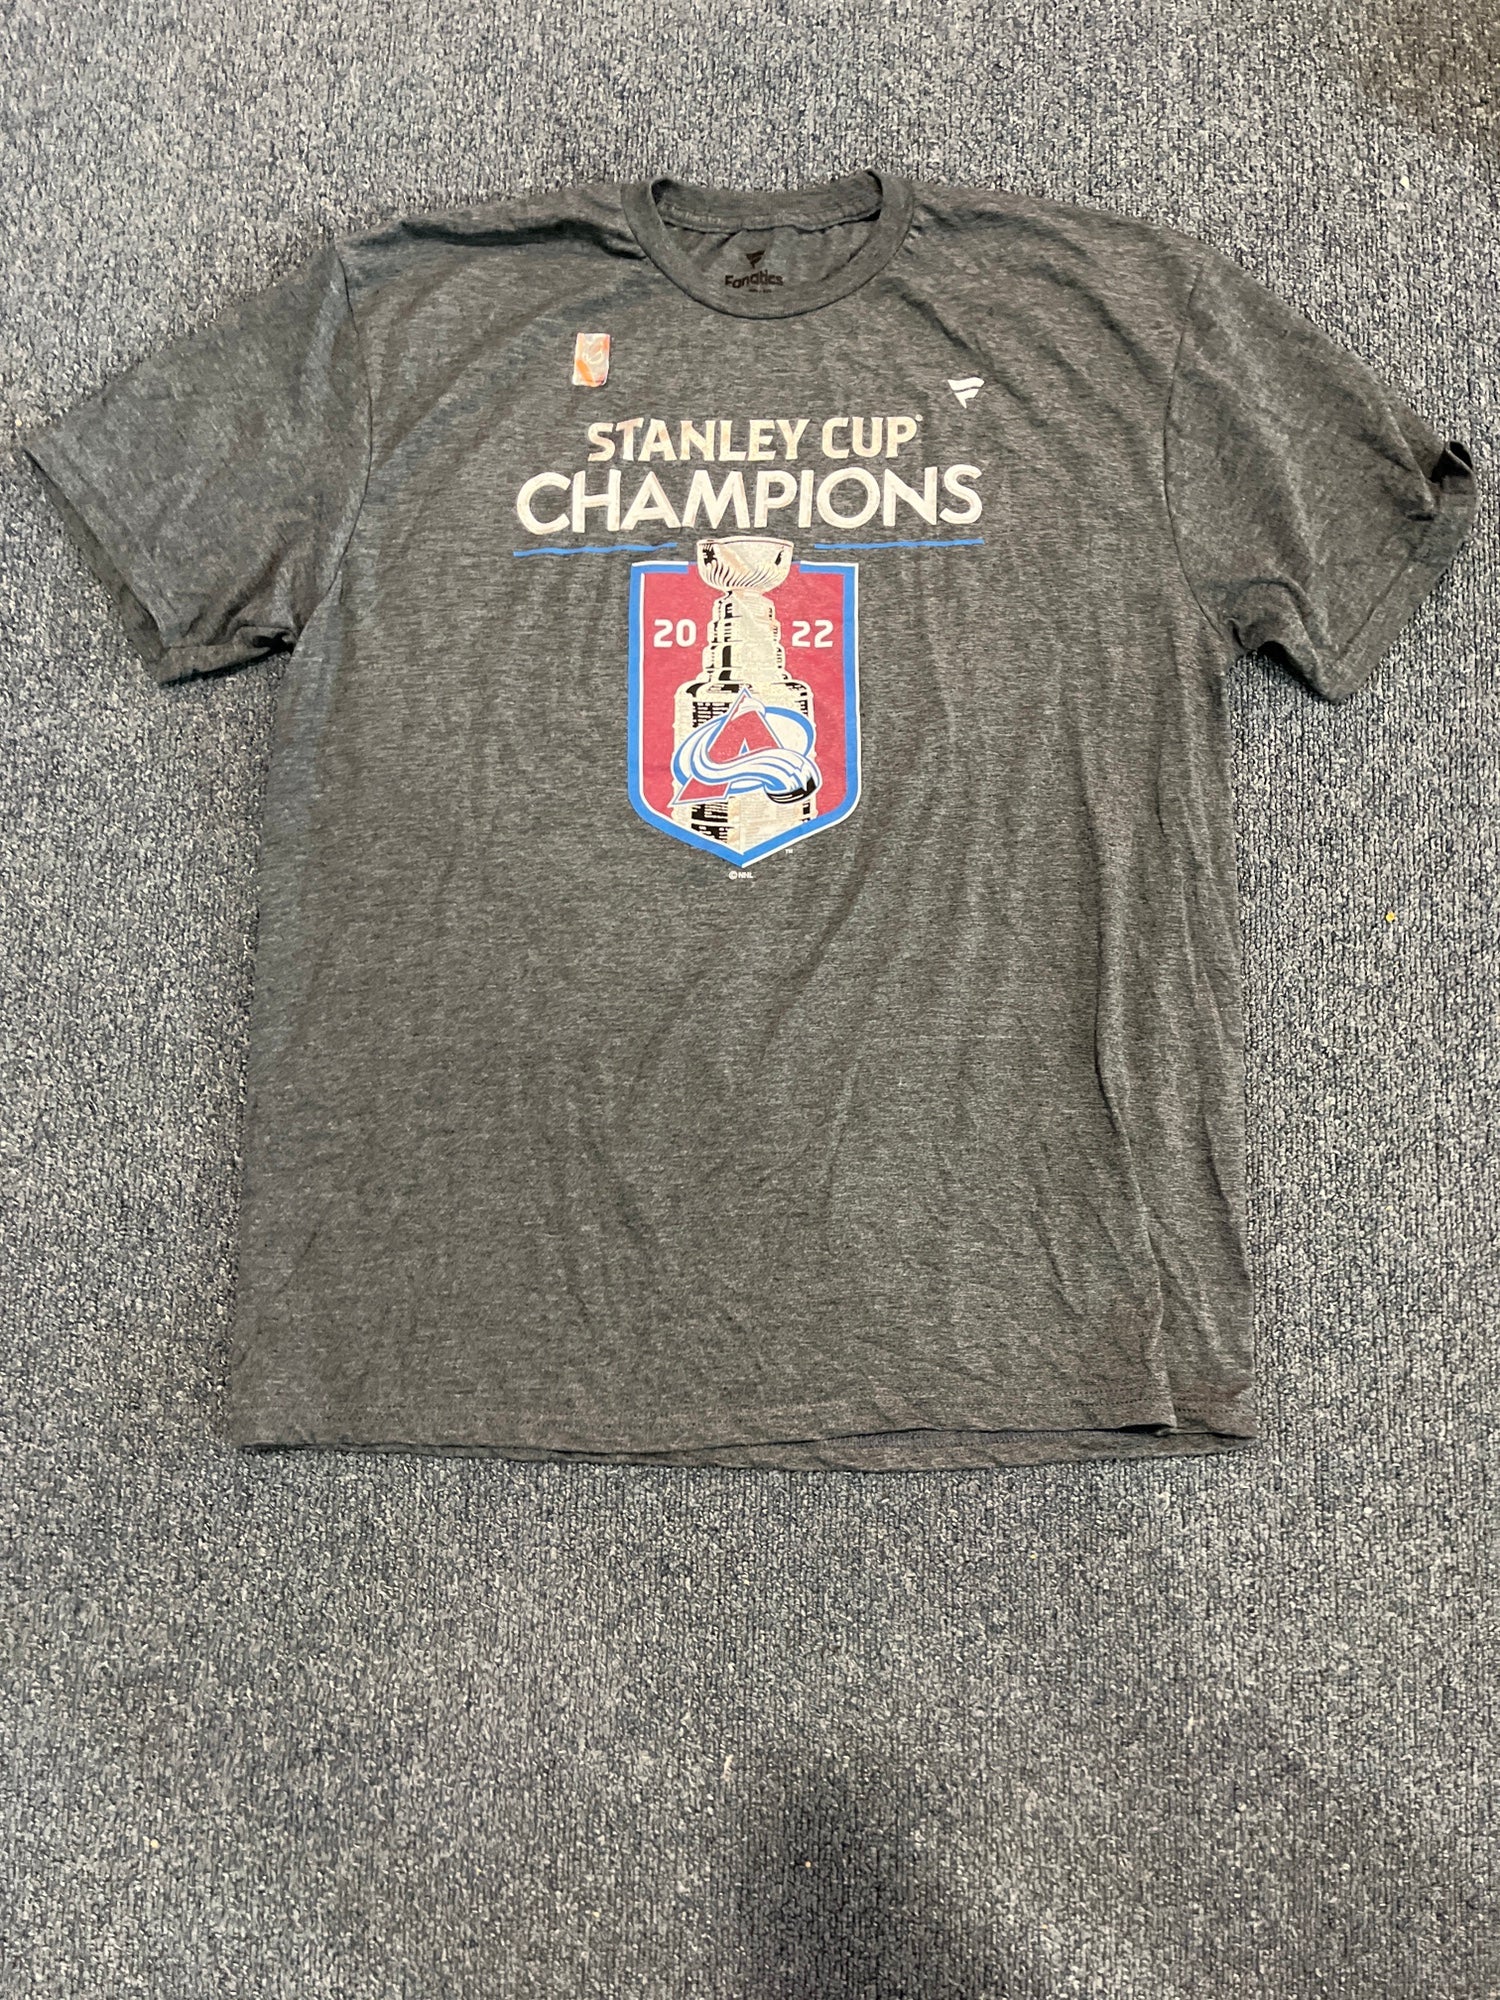 Stanley Cup Champions St Louis Blues 2019 t-shirt by To-Tee Clothing - Issuu